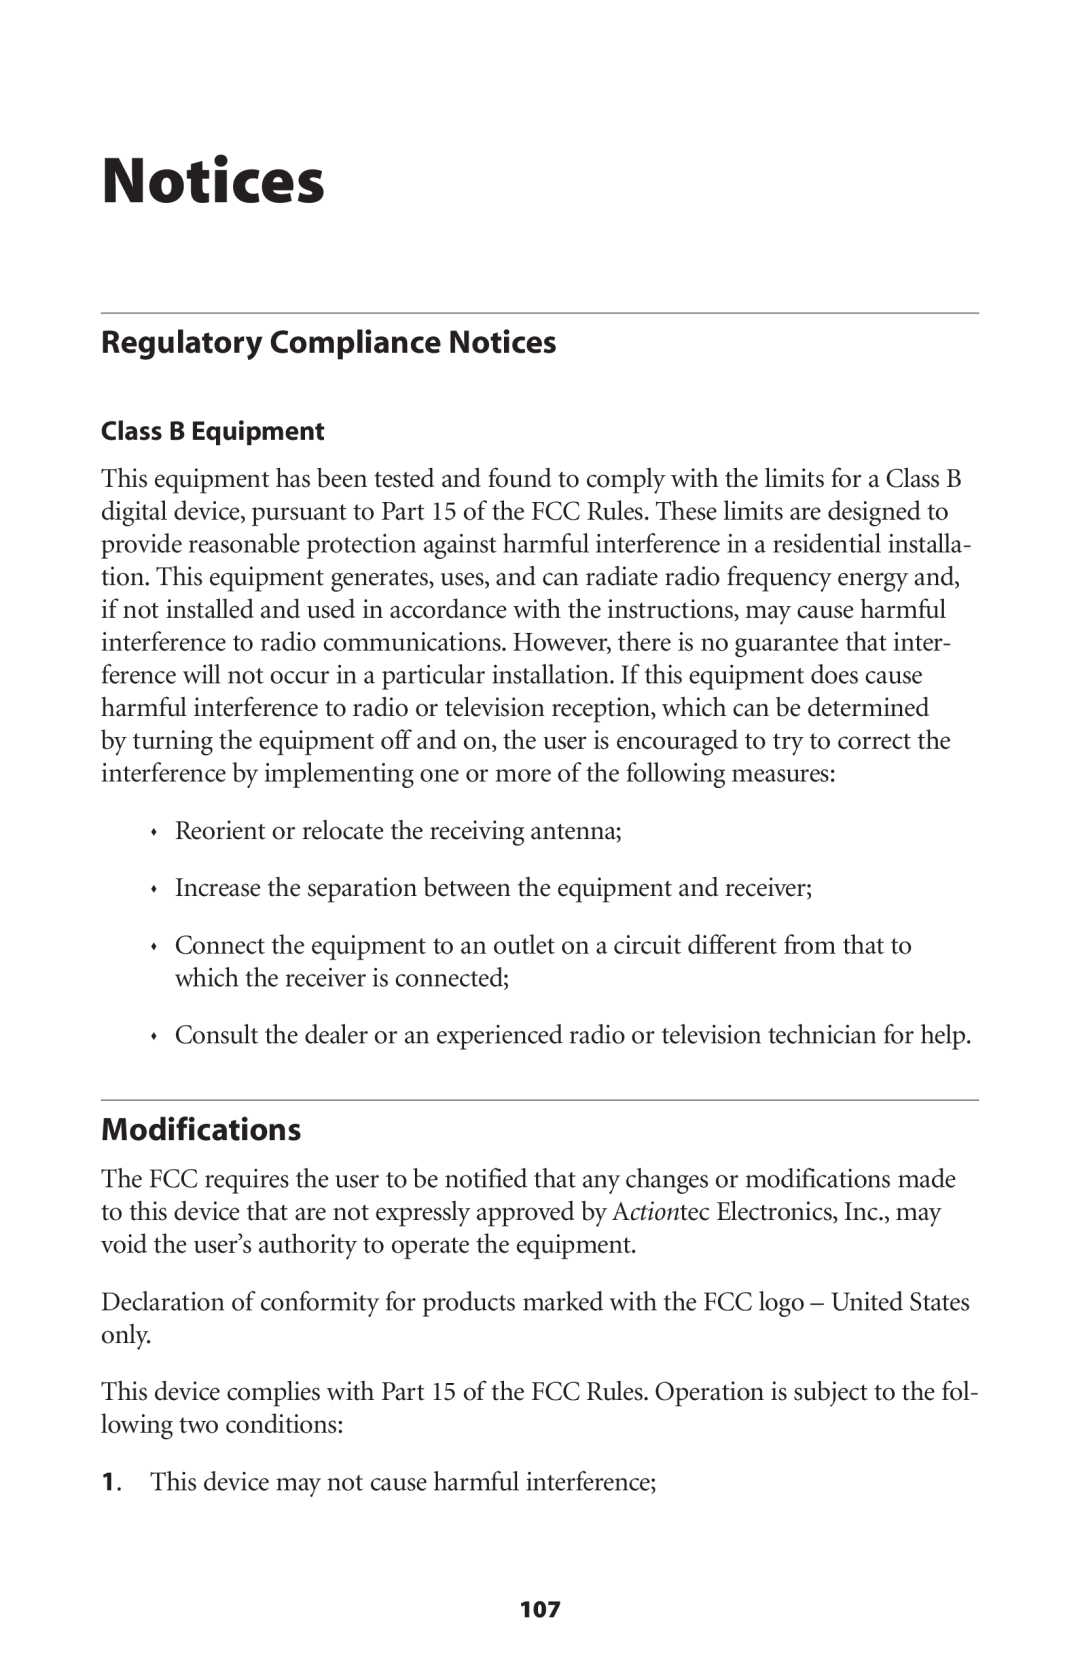 Actiontec electronic GT704WR user manual Regulatory Compliance Notices, Modifications 